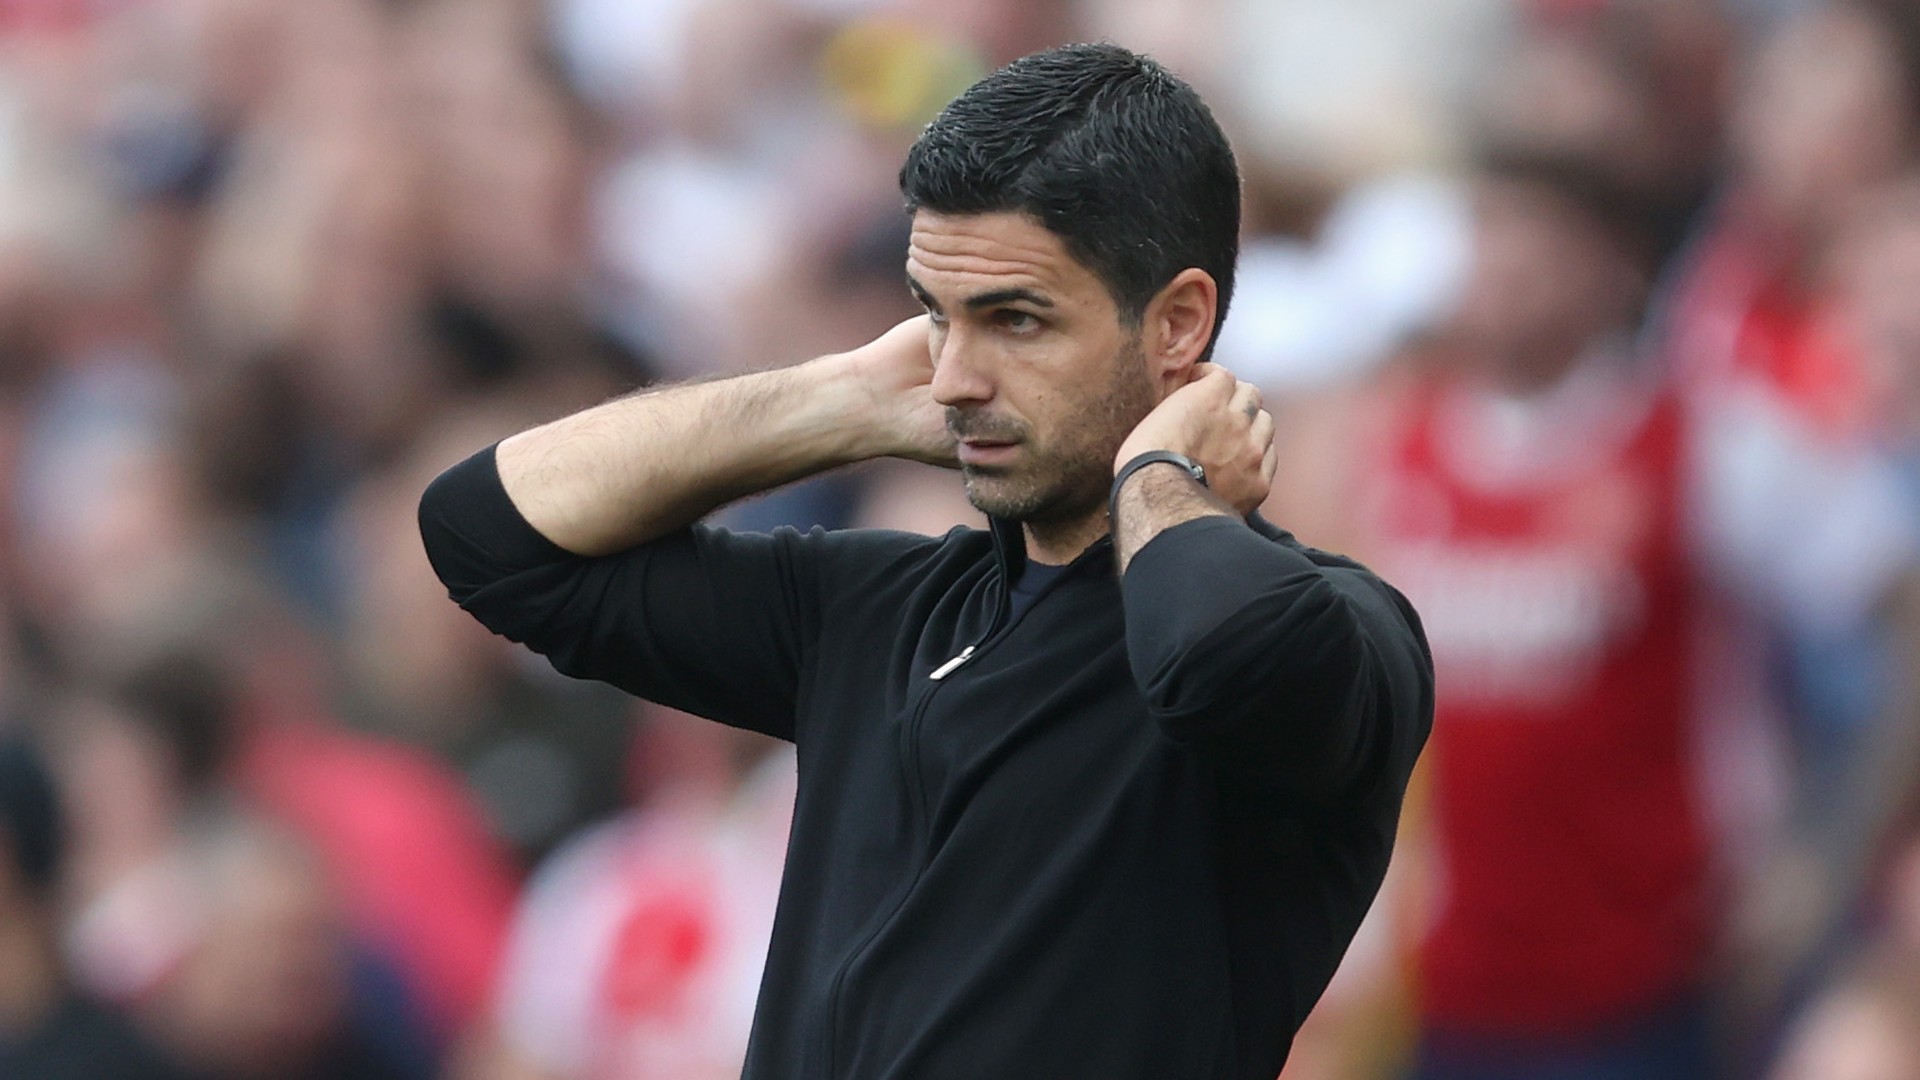 ‘It will get worse’ – Arsenal boss Arteta says young managers are turning away from coaching due to abuse